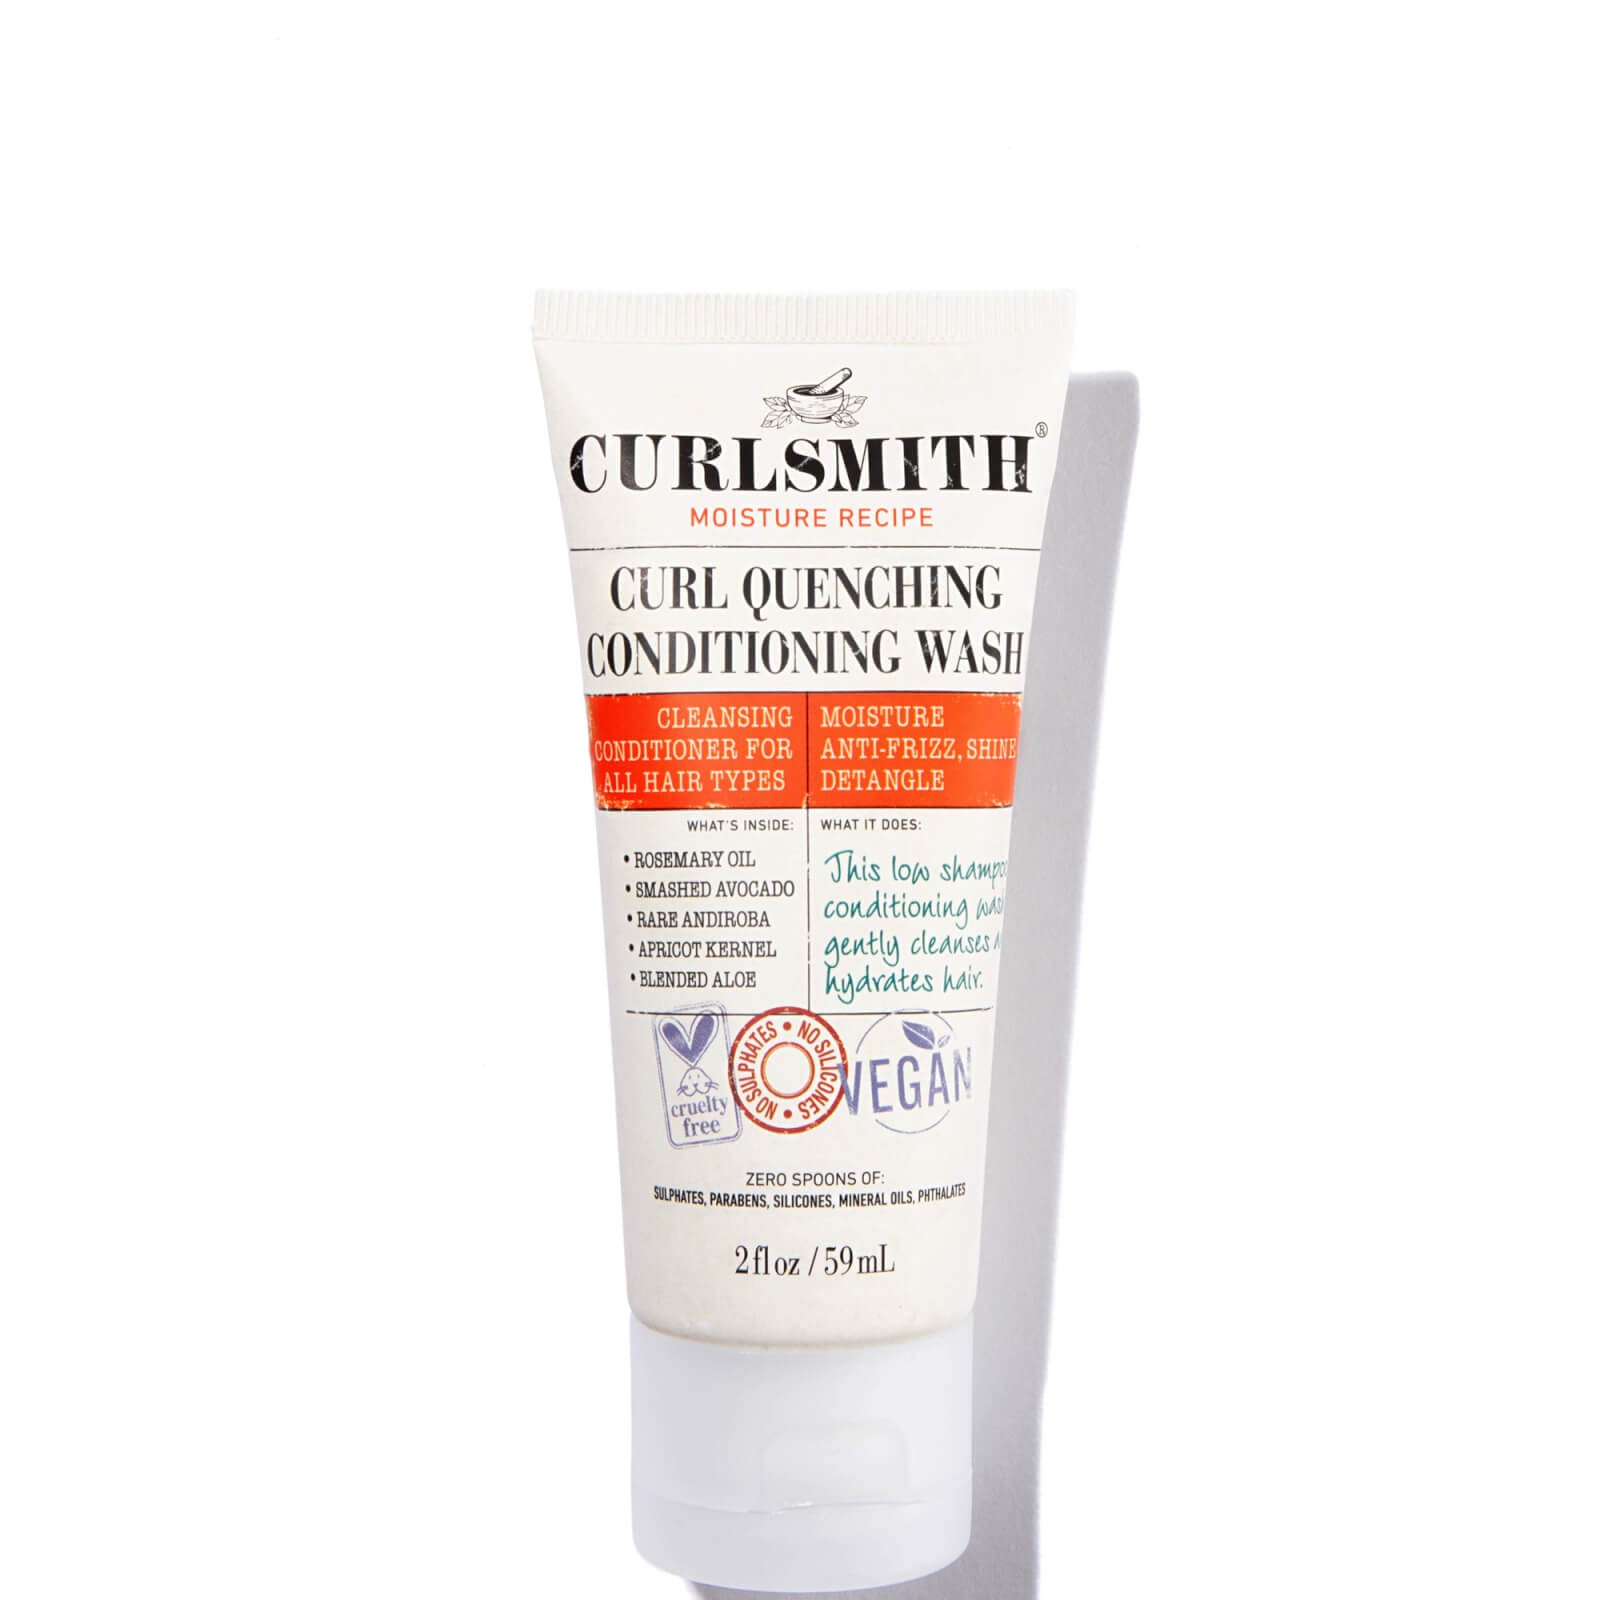 Image of Curlsmith Curl Quenching Conditioning Wash Travel Size 59ml